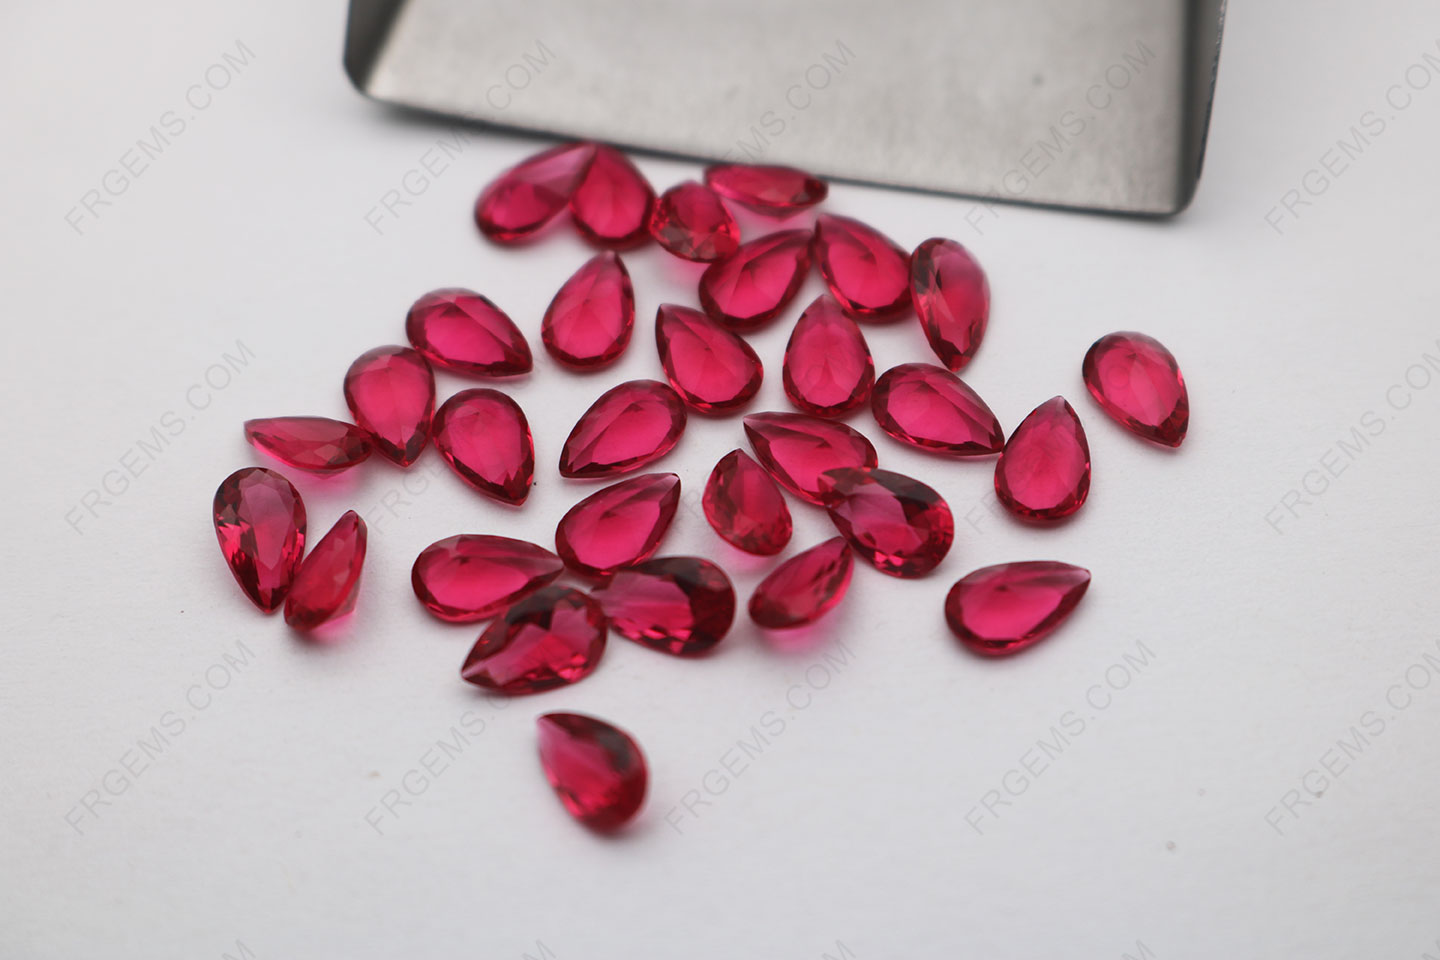 Glass Ruby Red BR502# Pear shape Faceted cut 8x5mm Loose gemstones manufacturer in China